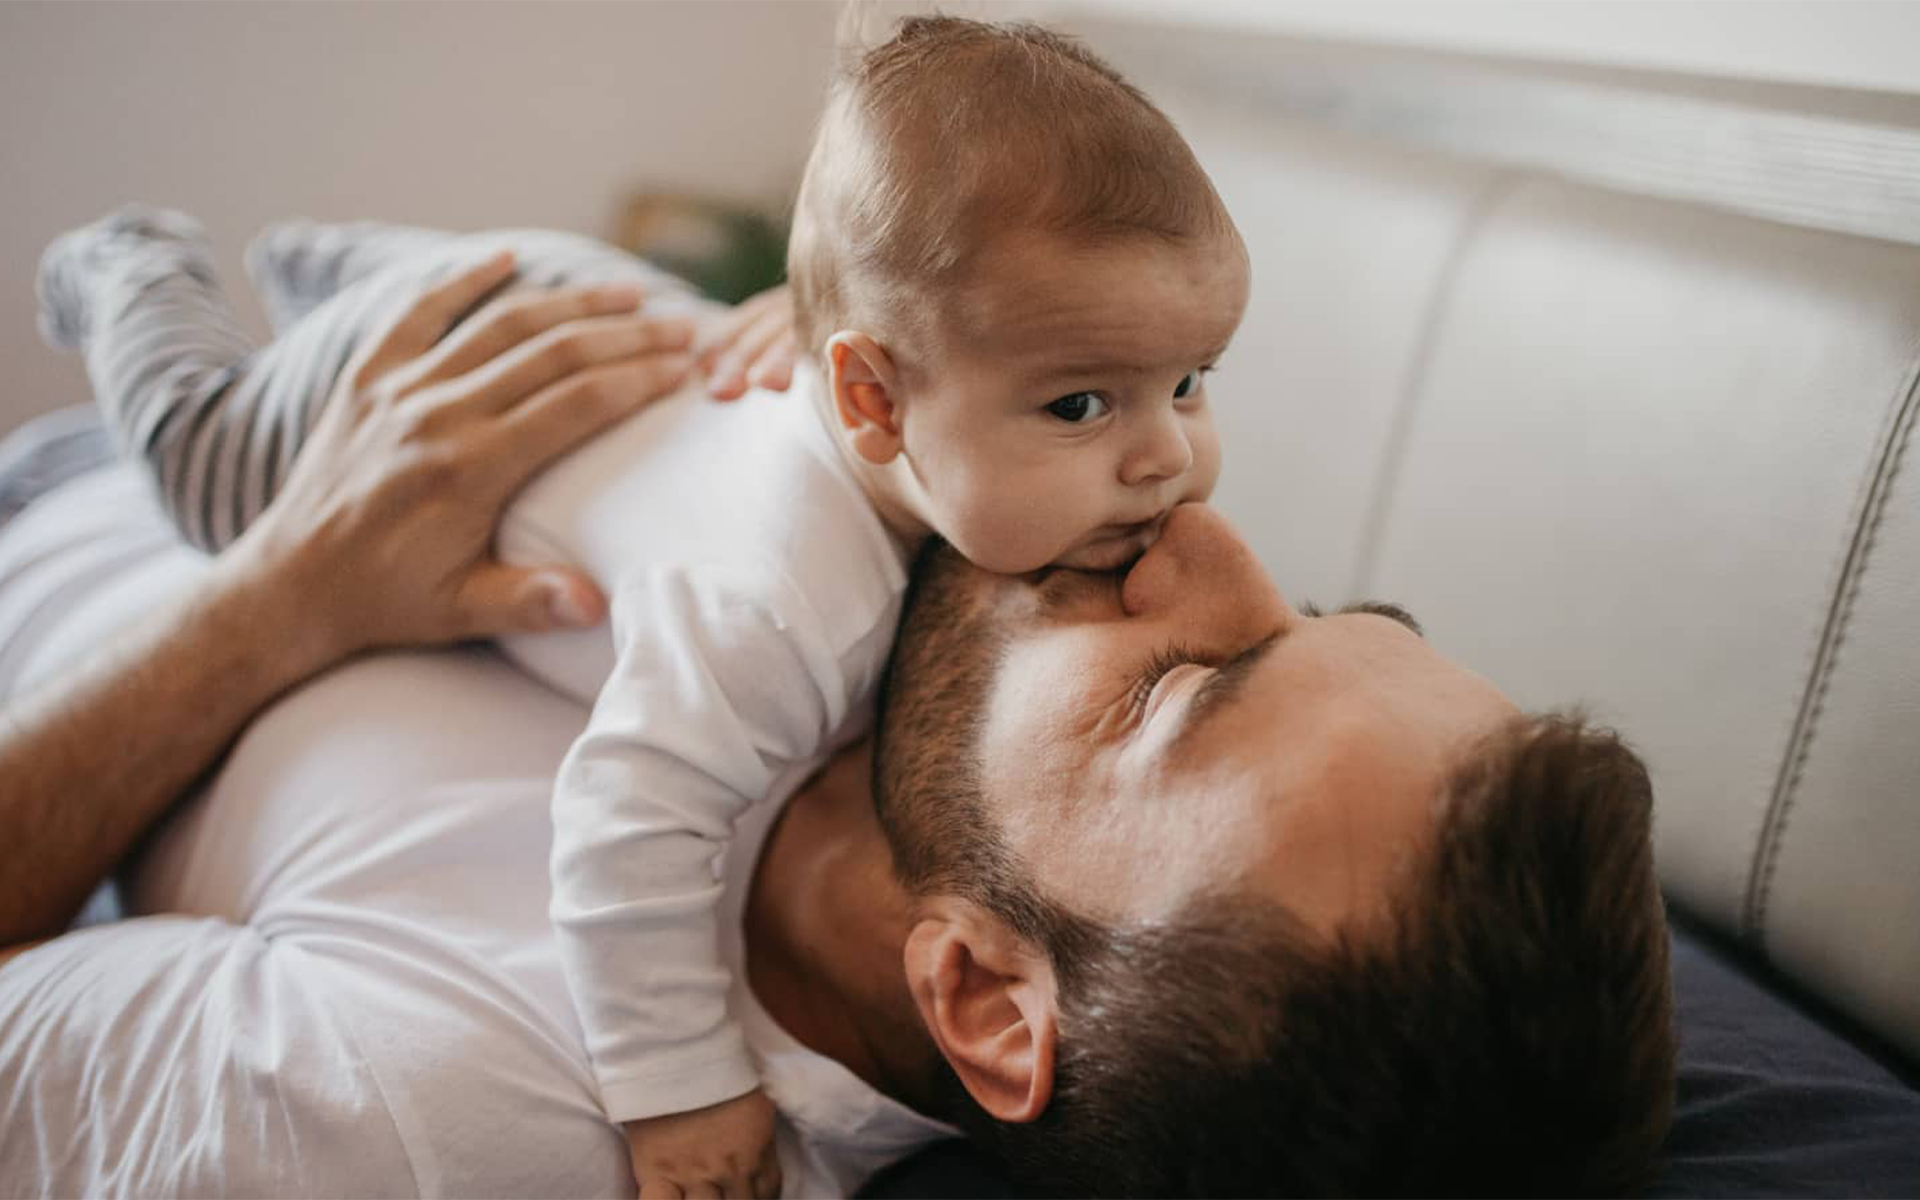 How To Choose First Father's Day Gifts Based On His Zodiac Sign